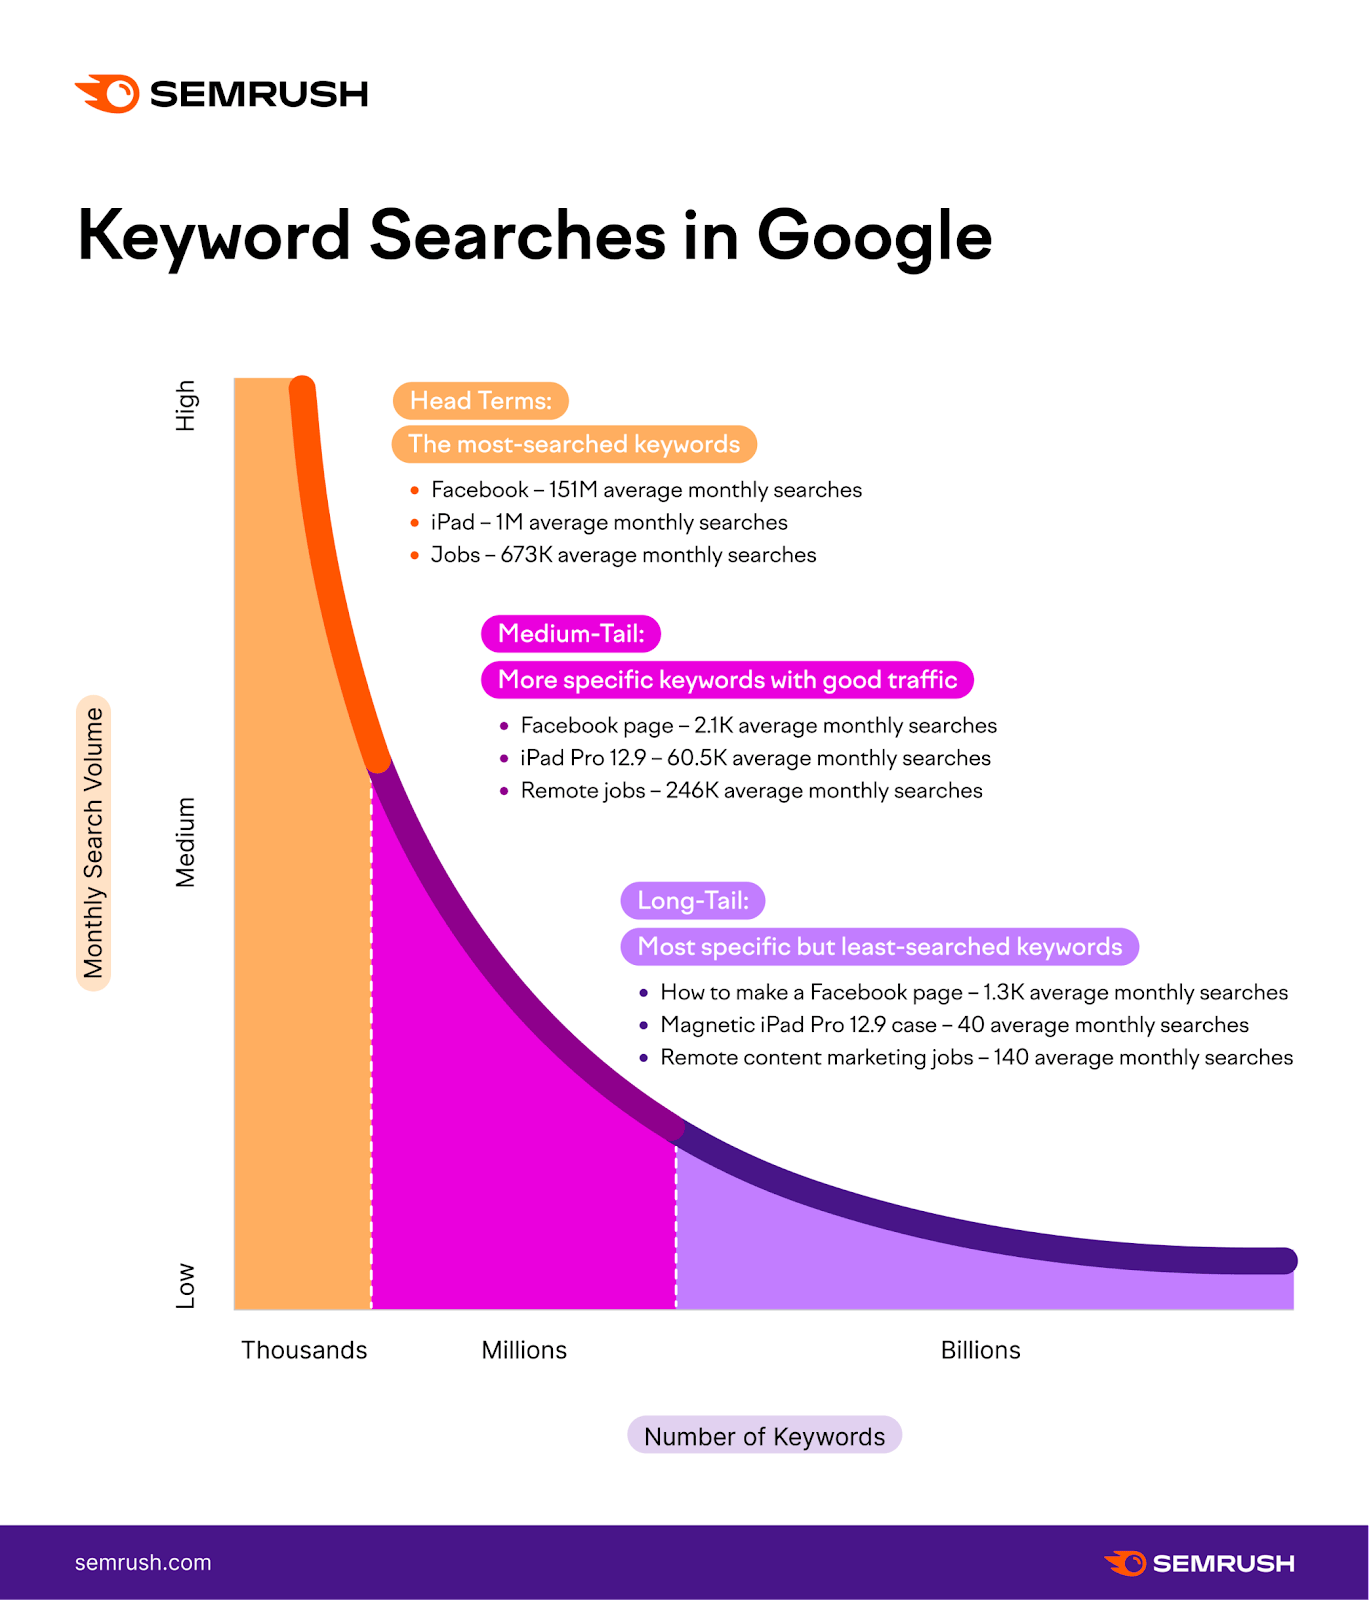 An infographic explaining keyword searches in Google